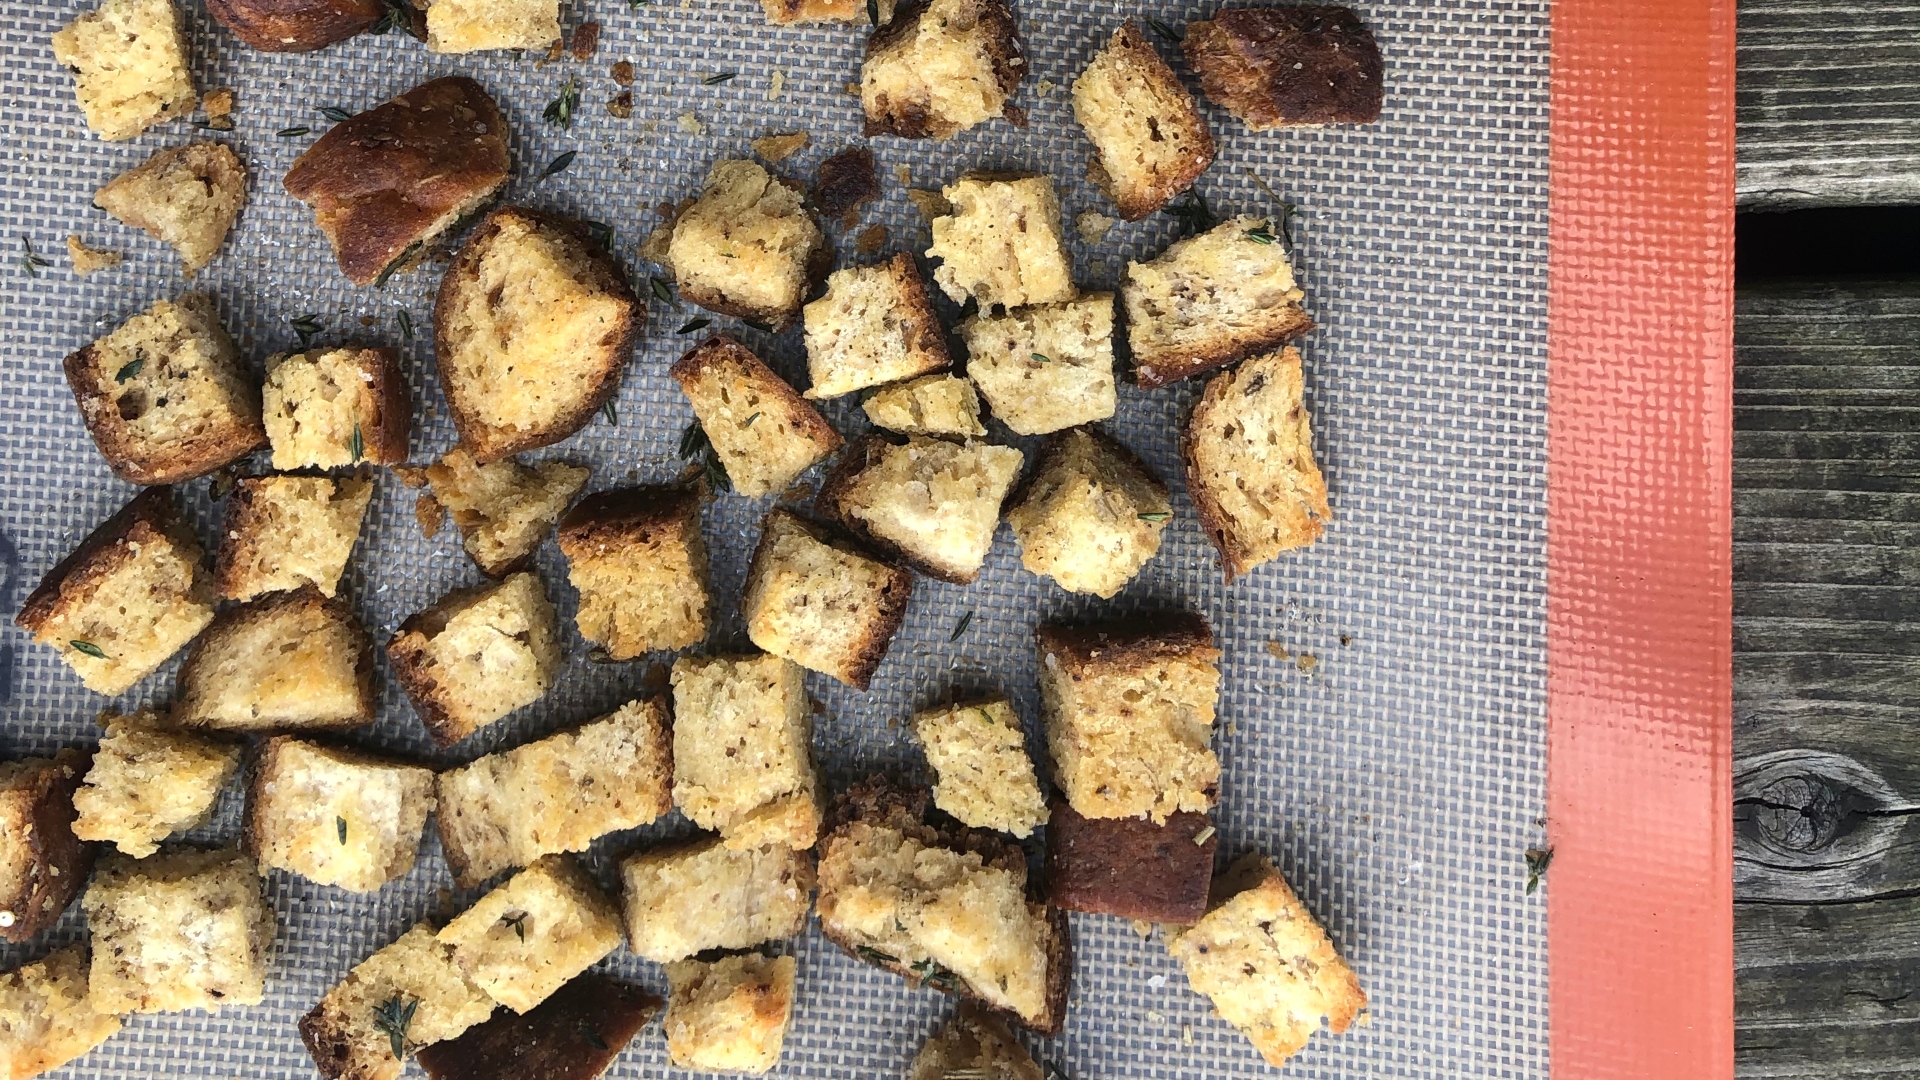 Herbed croutons